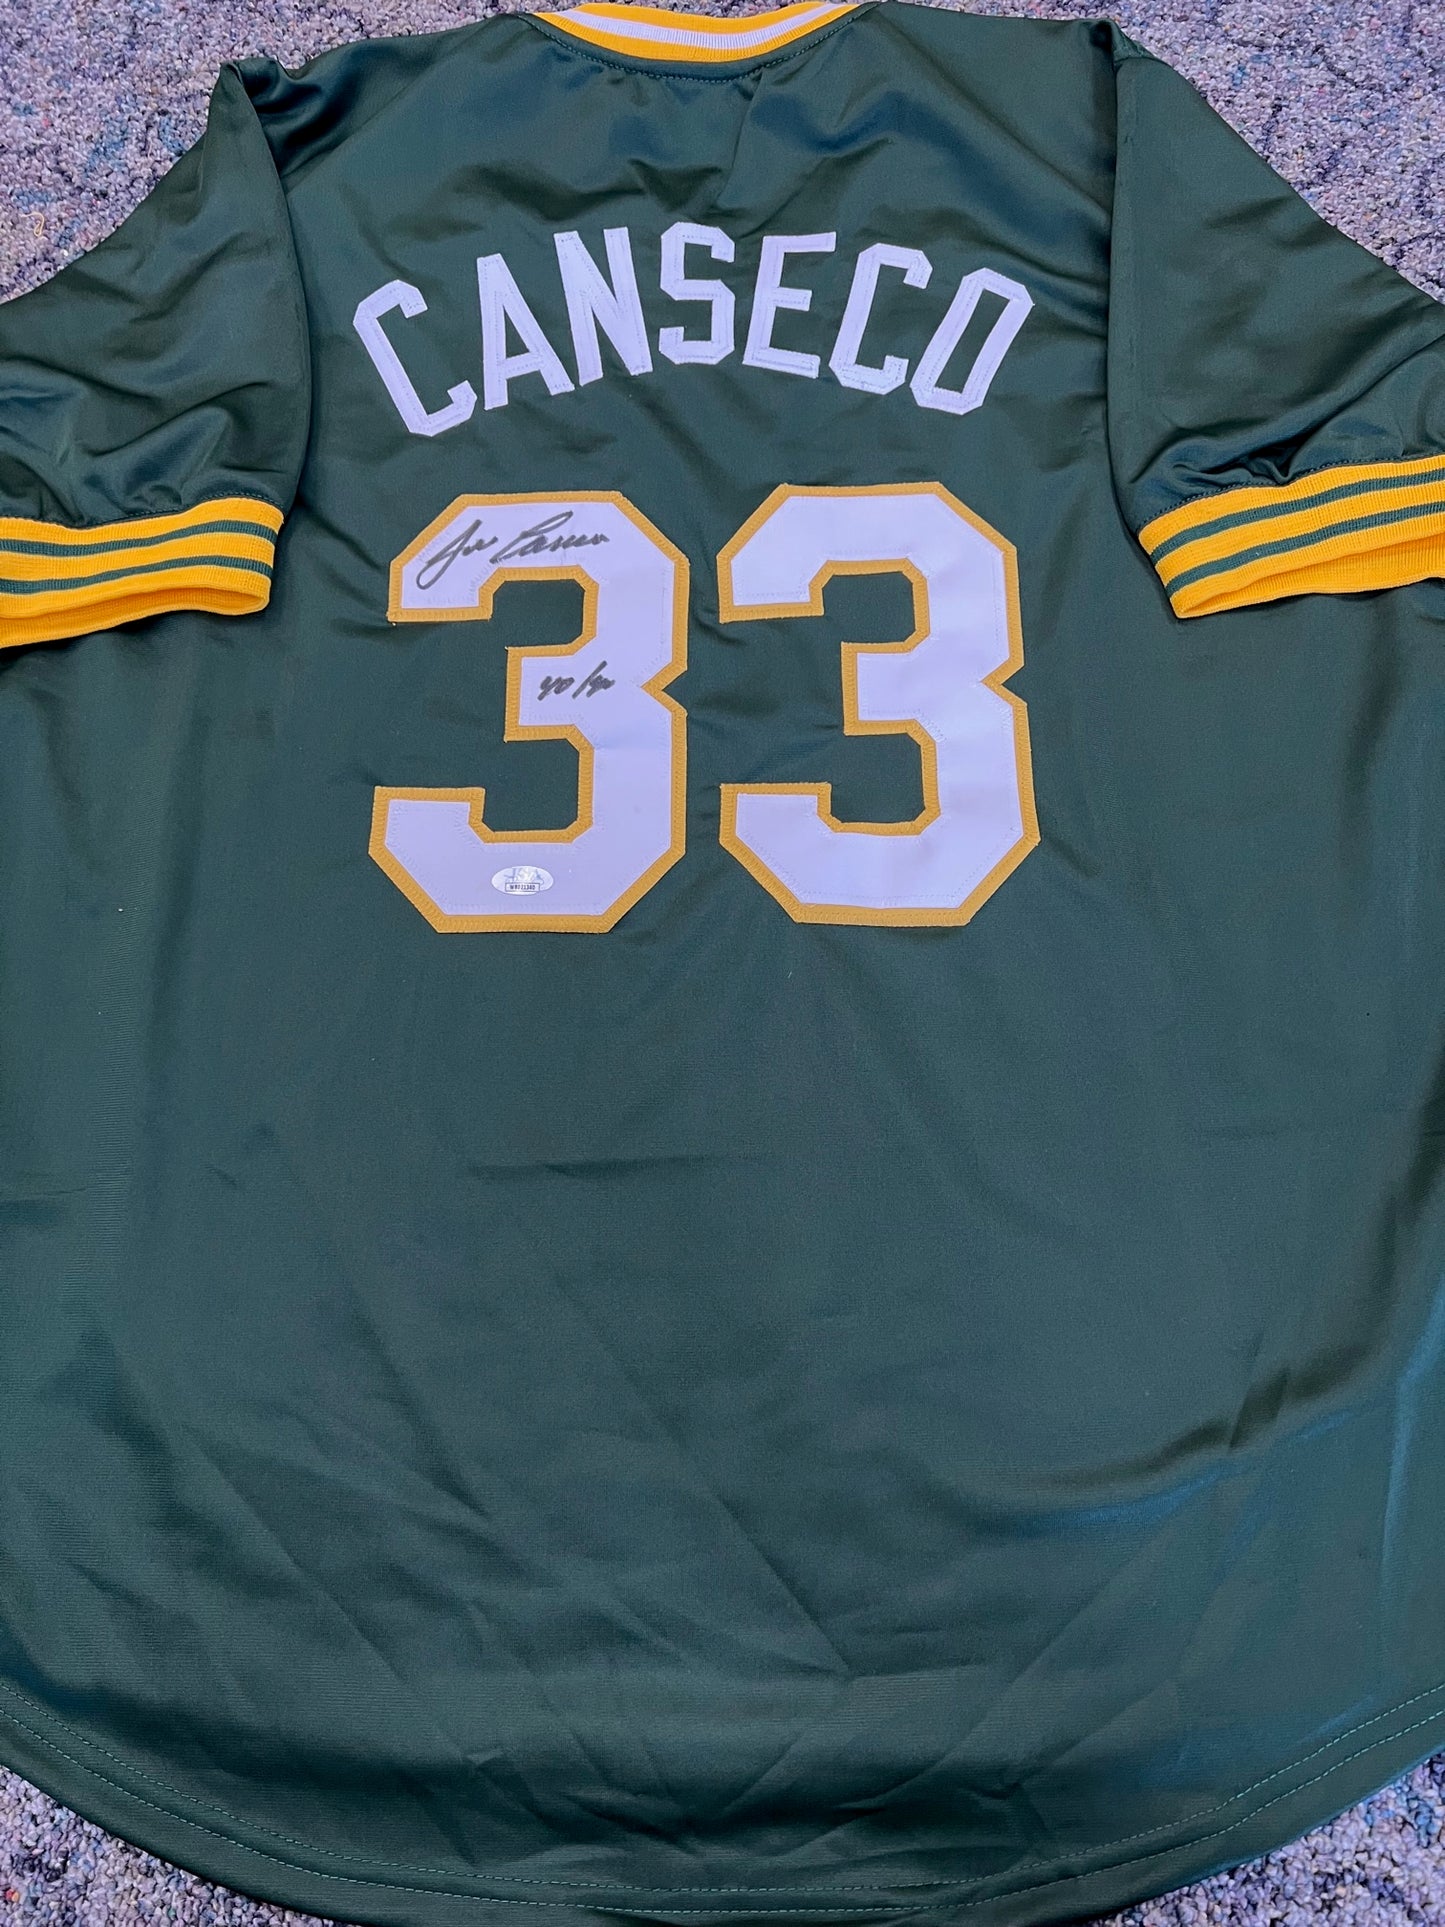 Oakland A's Jose Canseco Signed/Inscribed Green Jersey with JSA COA